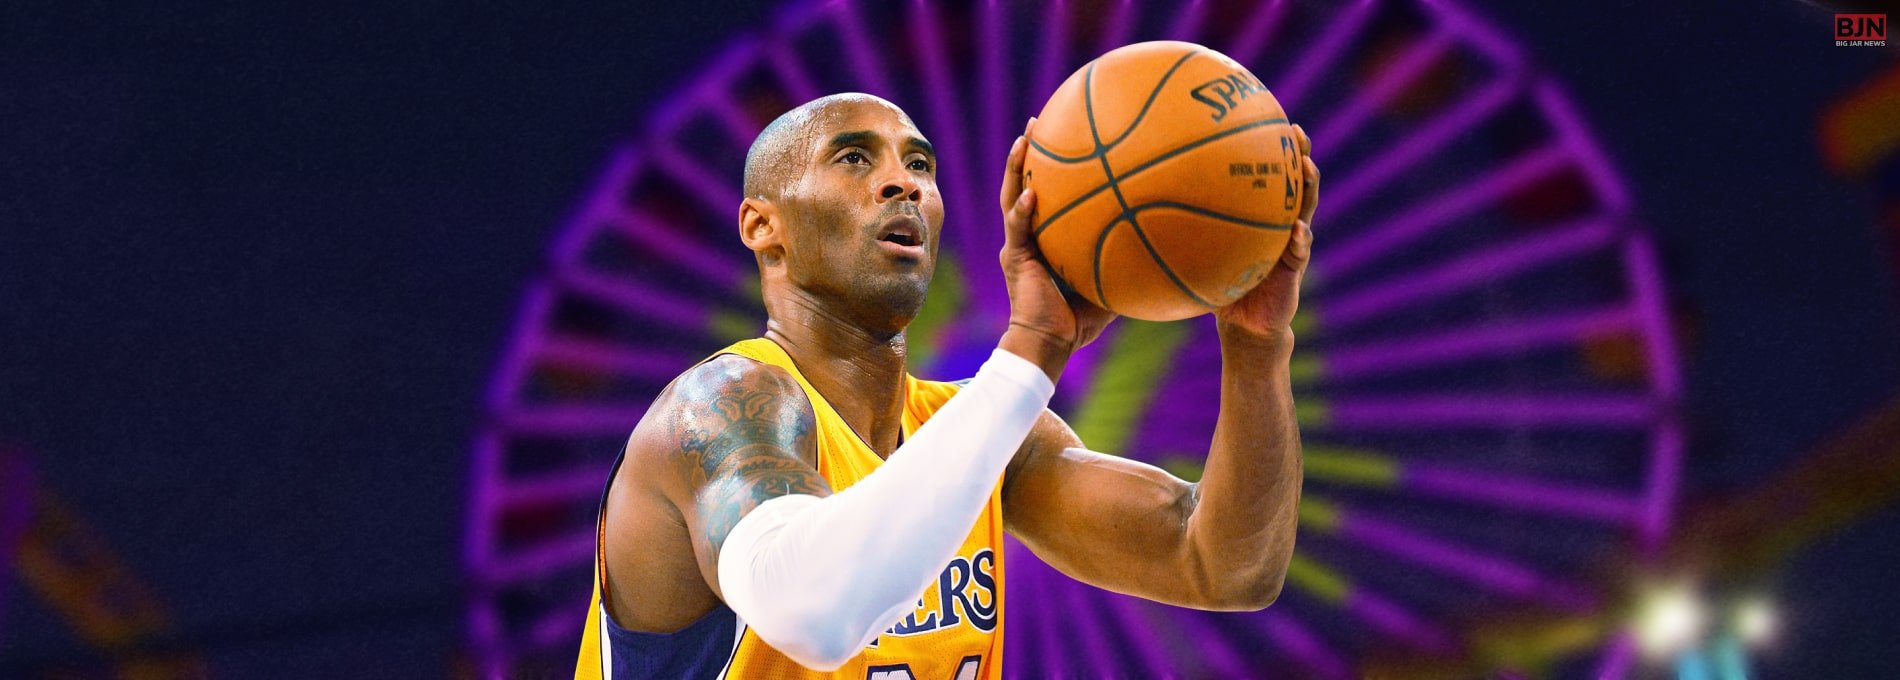 Icon Will Pay Tribute To Kobe Bryant By Lightning Up The Ferris Wheel